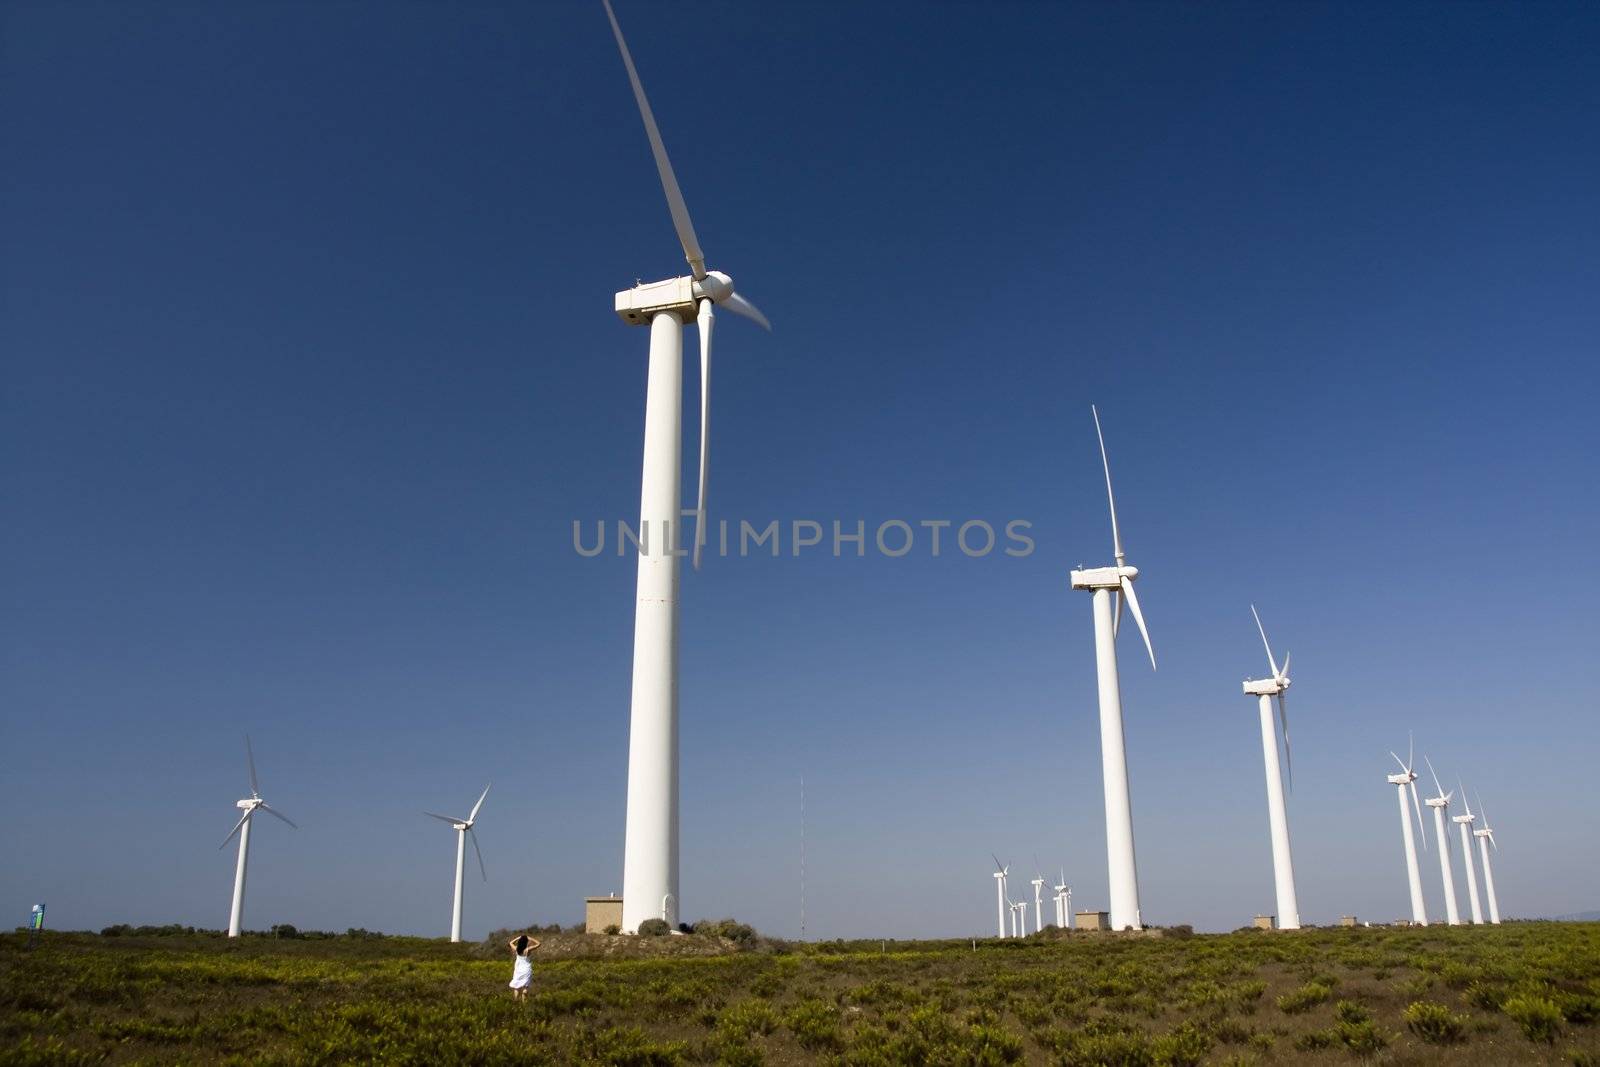 View of a young girl watching a field of windmills.